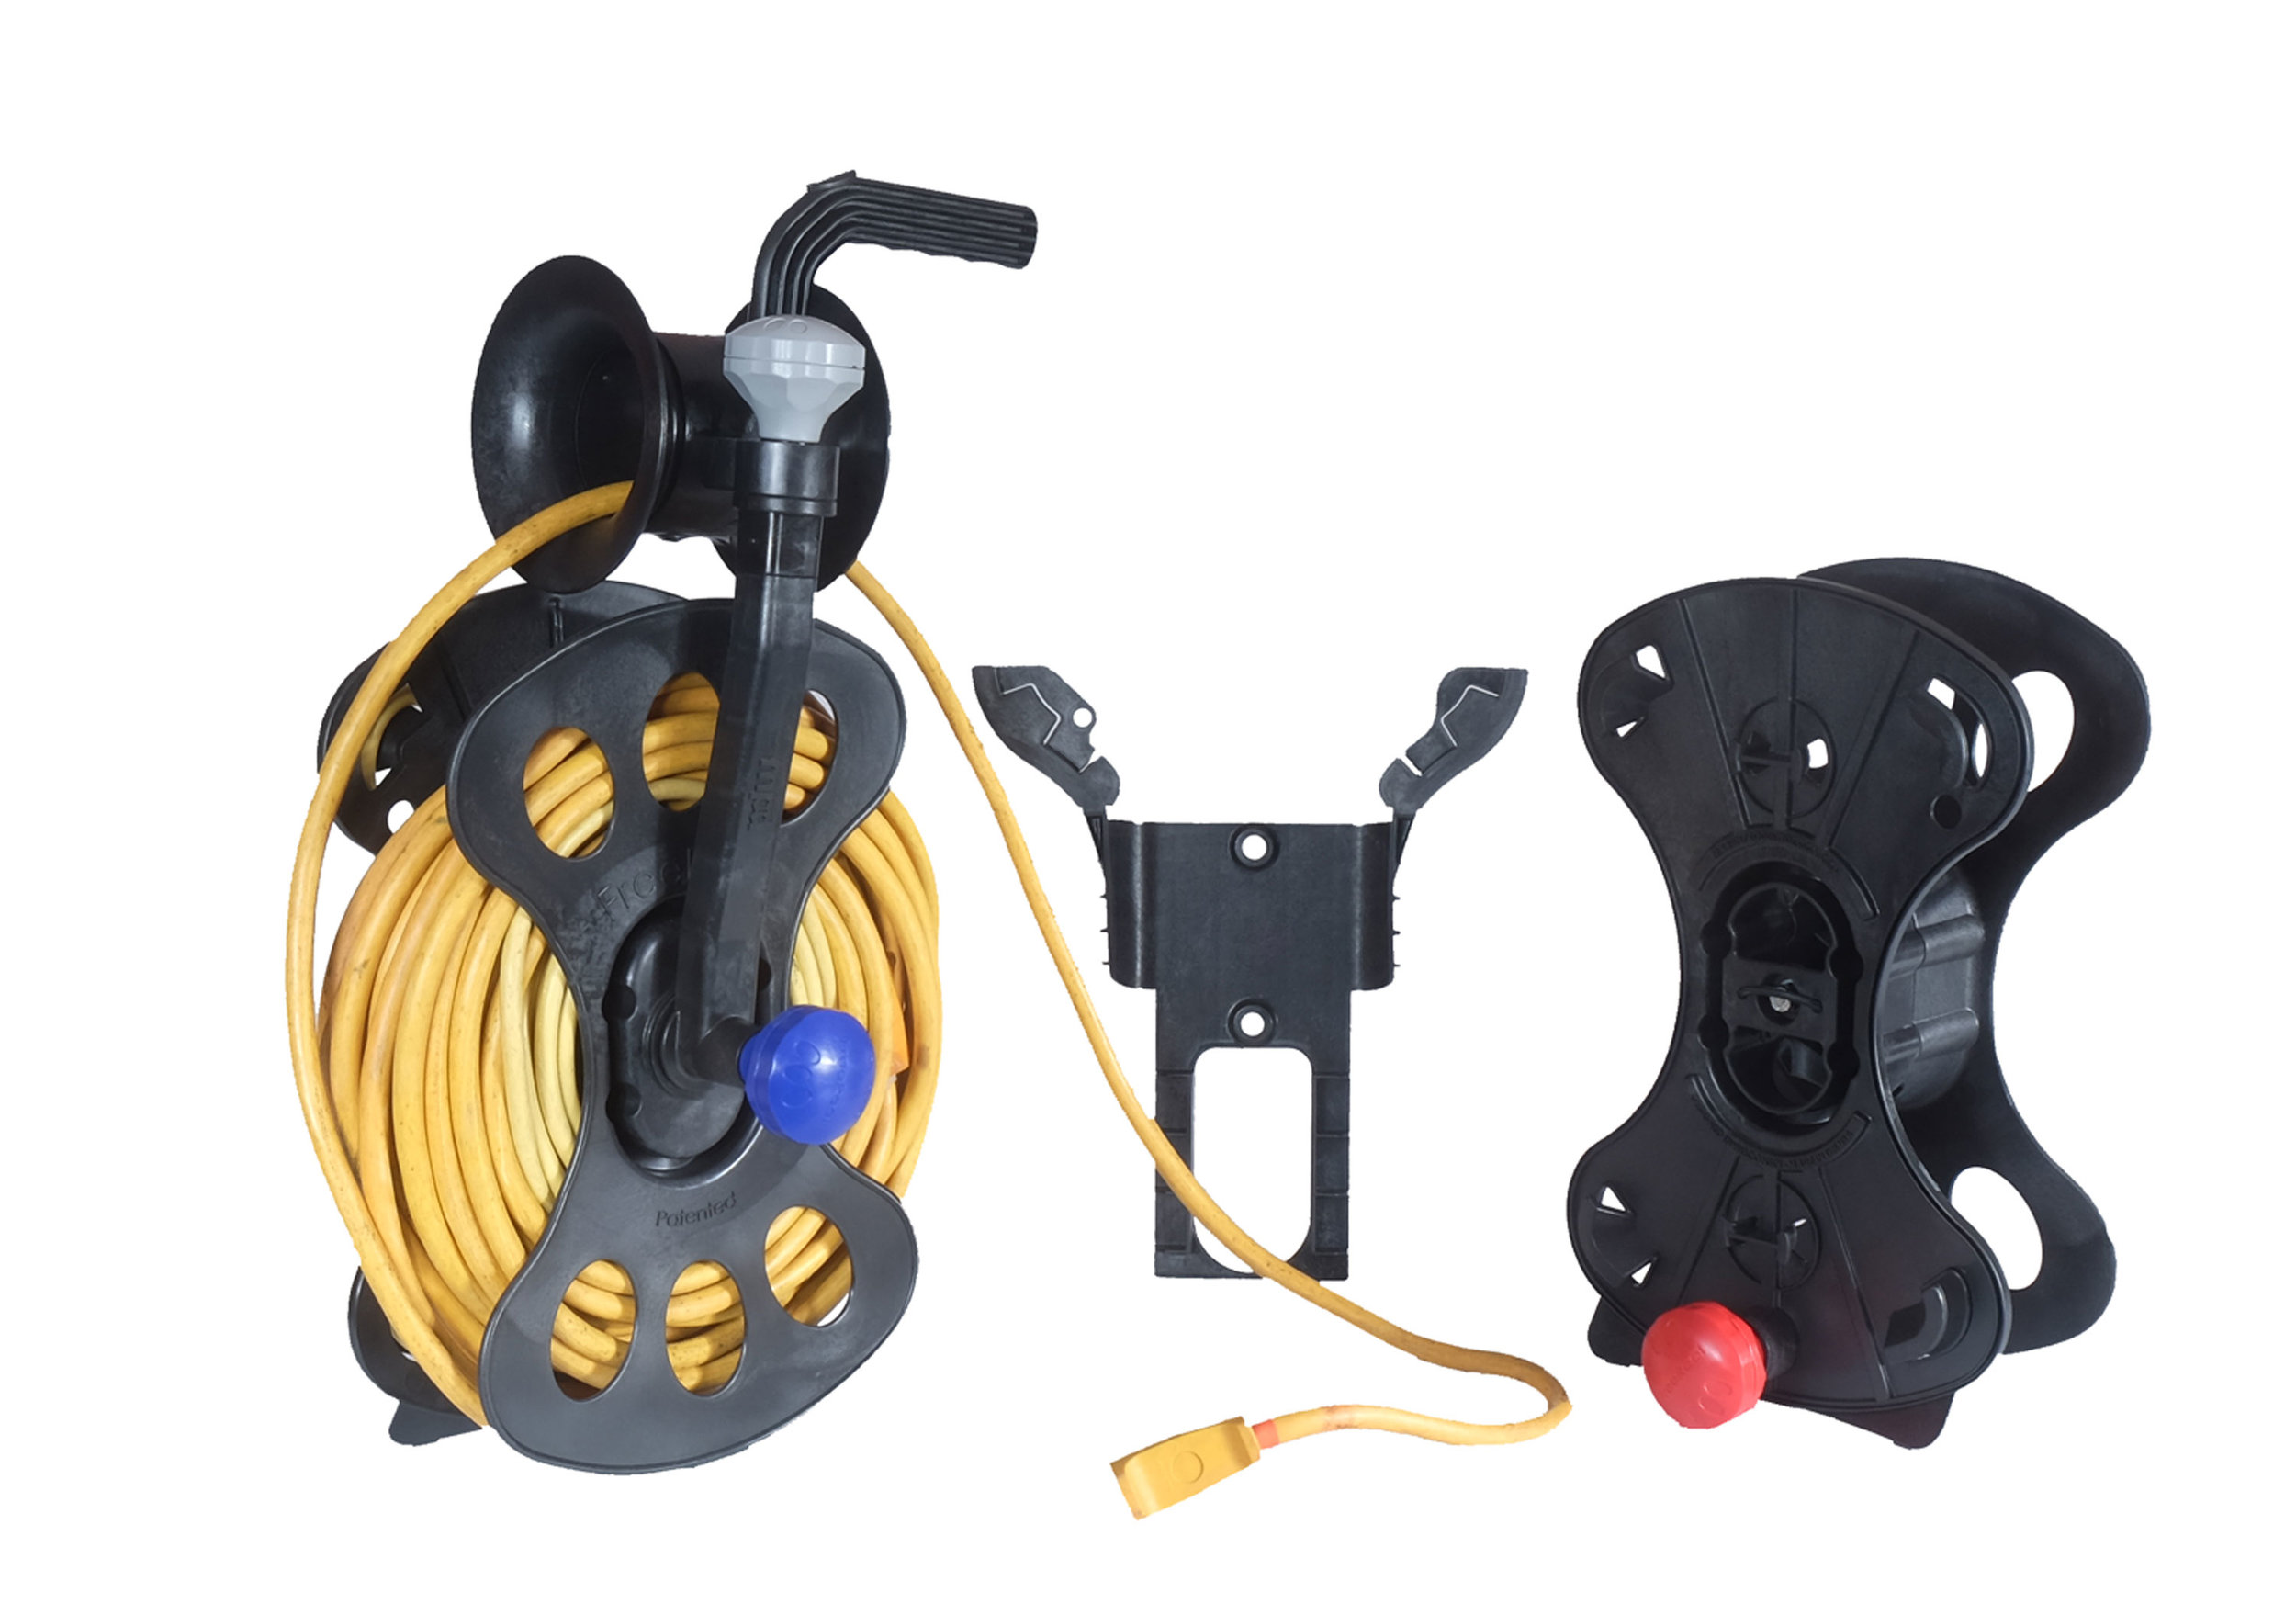 The FreeReel with a heavy gauge power cord